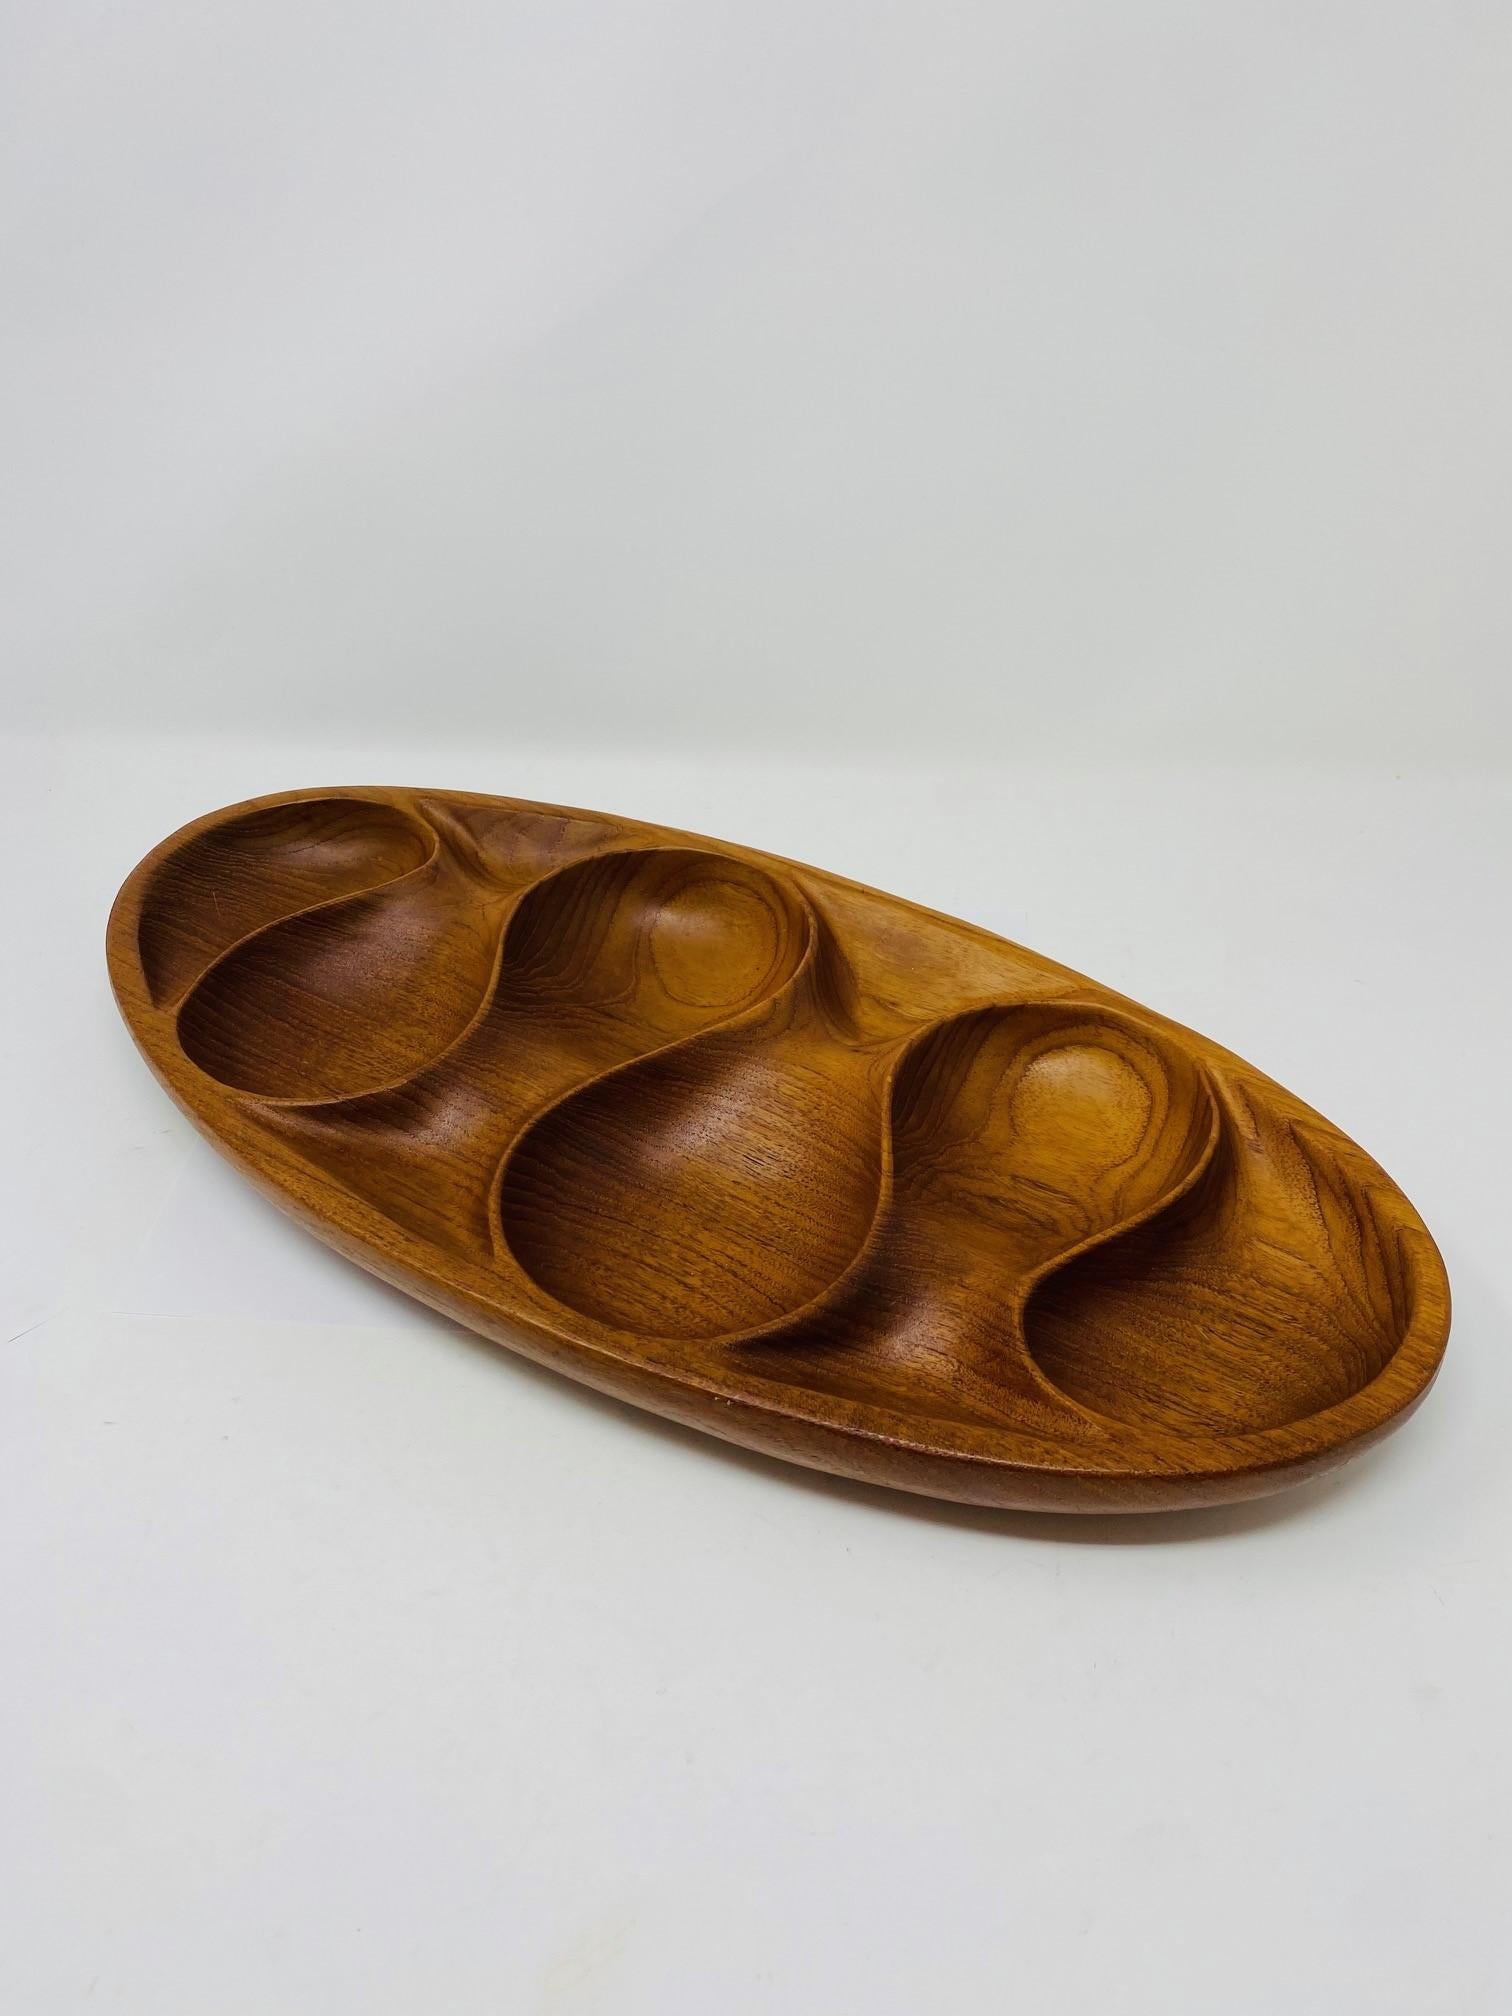 A beautiful and classic Mid-Century object that is ever timeless.  This beautiful bowl/tray created in teak is constructed with 6 carved components that transcend utility to make it sculptural.  An incredible example of Danish hand crafted design.